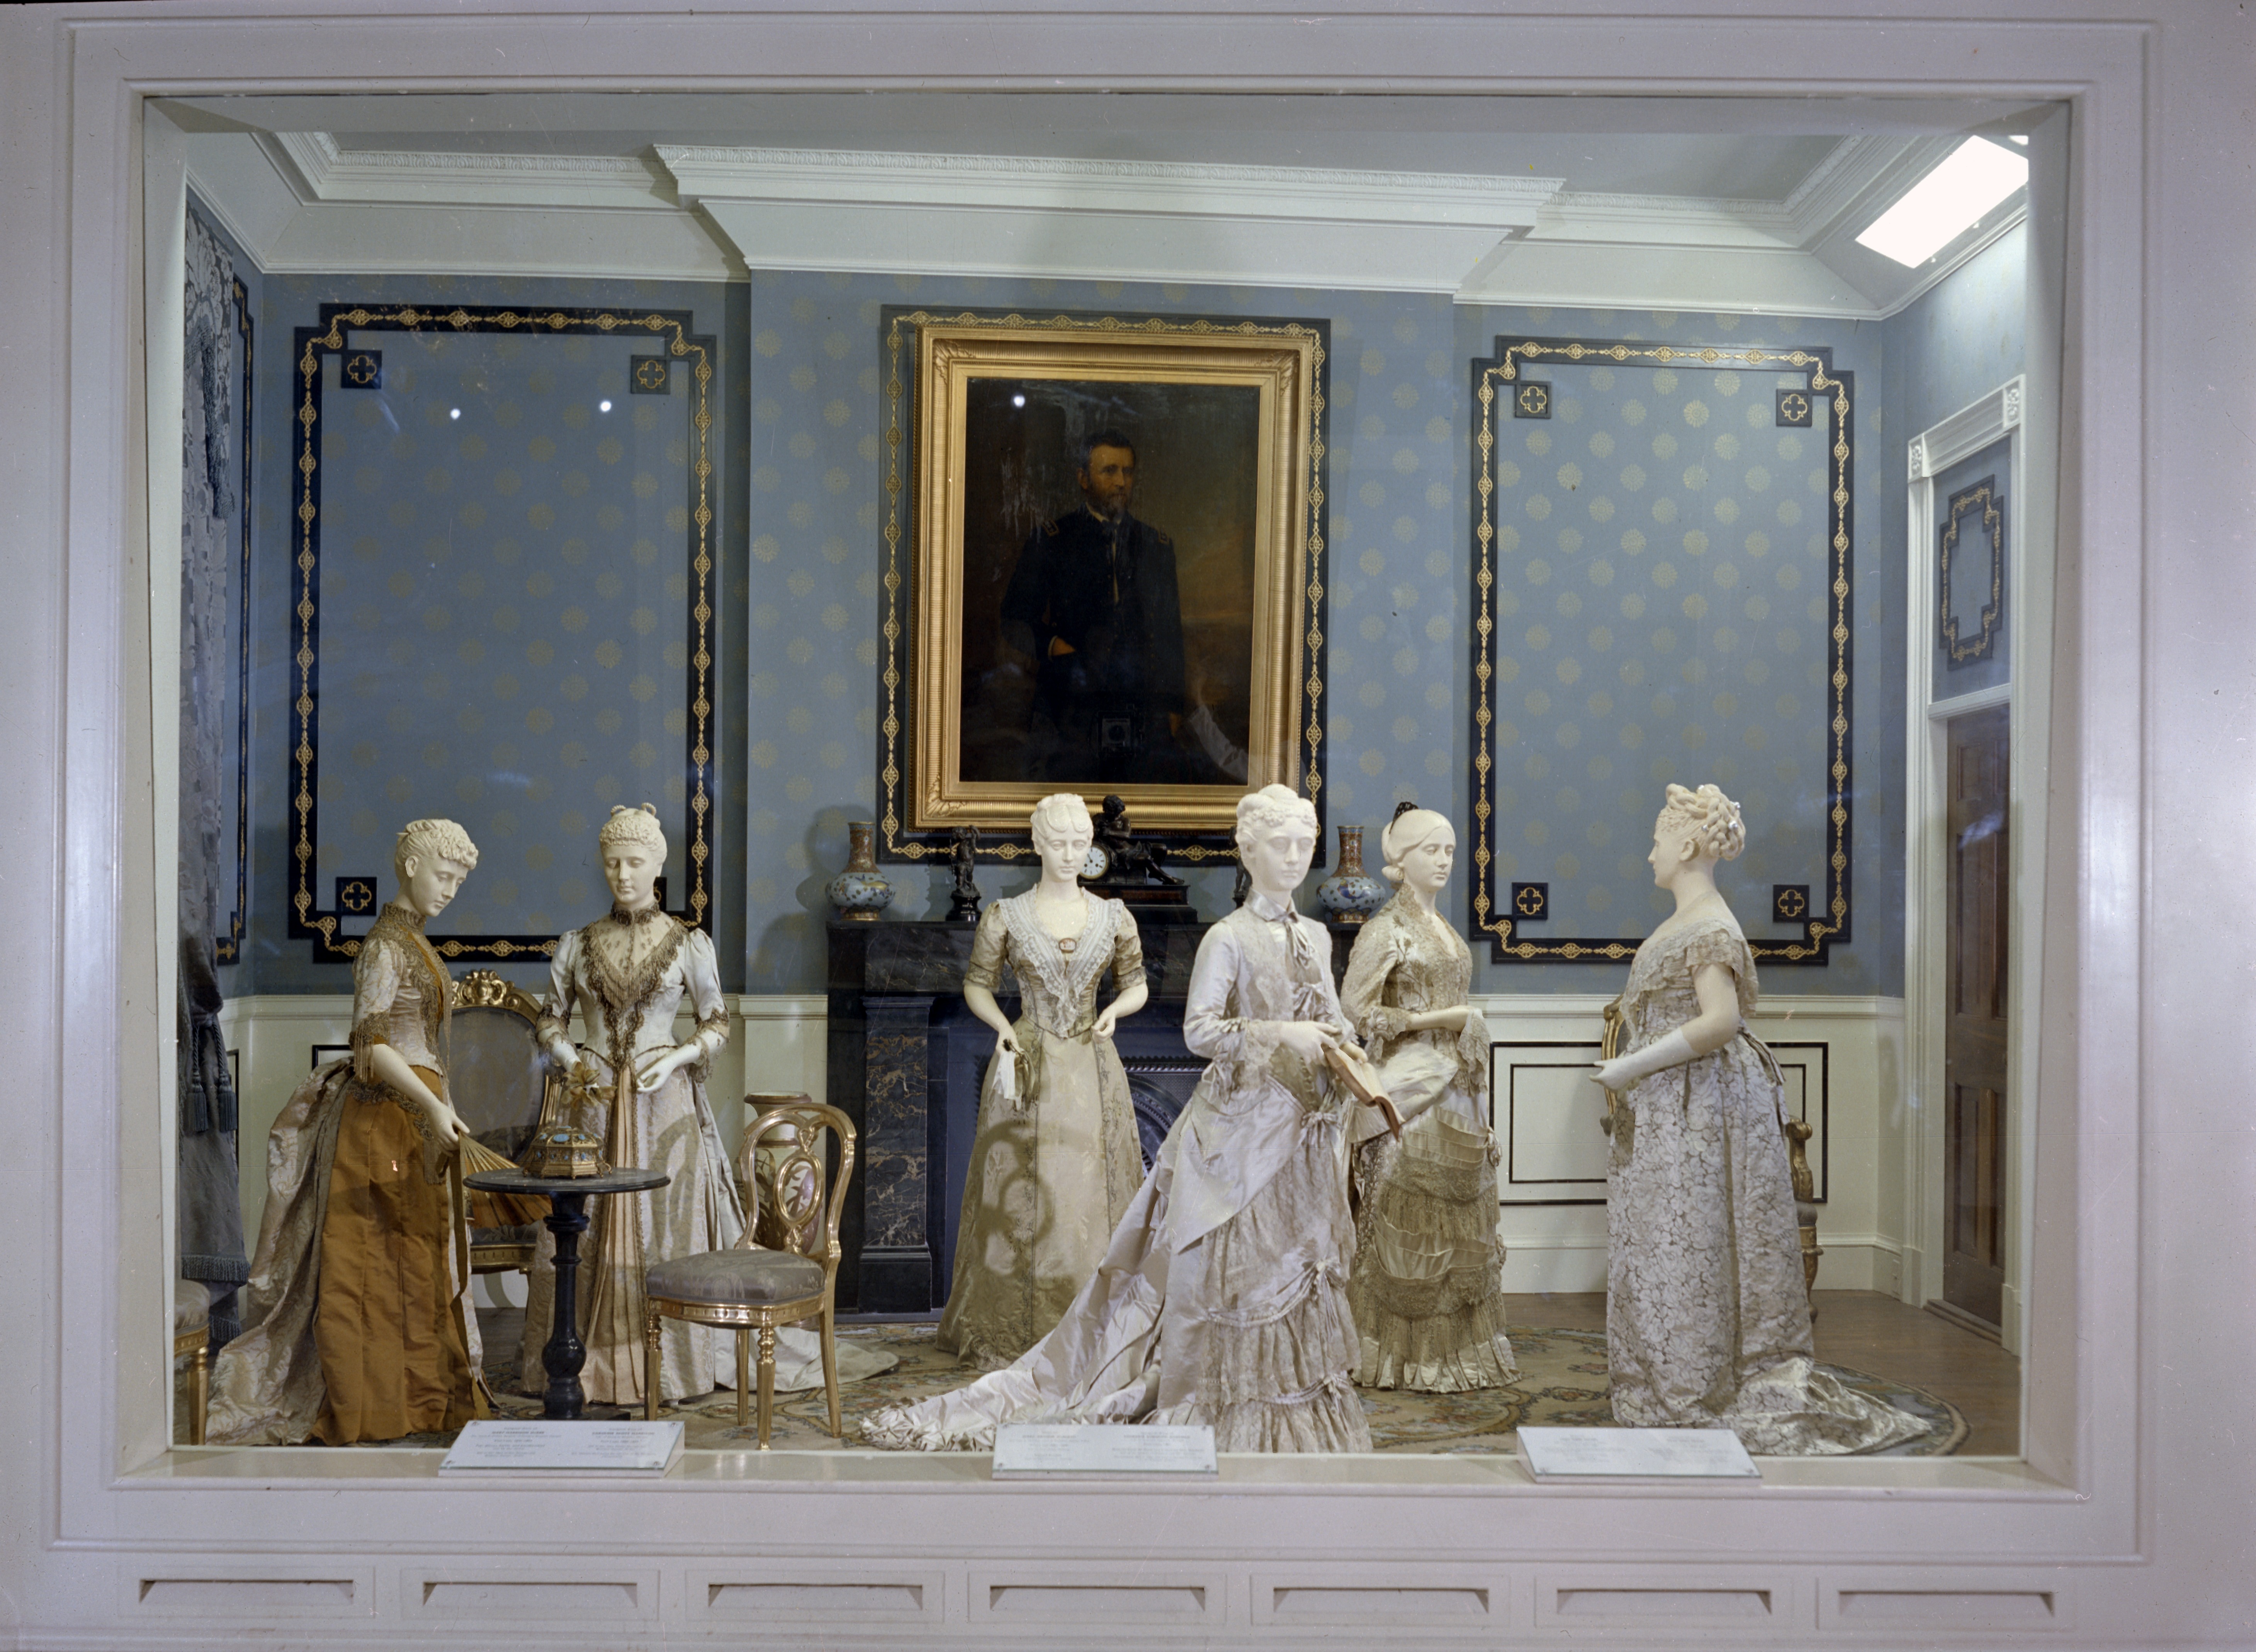 6 mannequins in gowns stand in a blue room with a portrait in the background on a wall. 